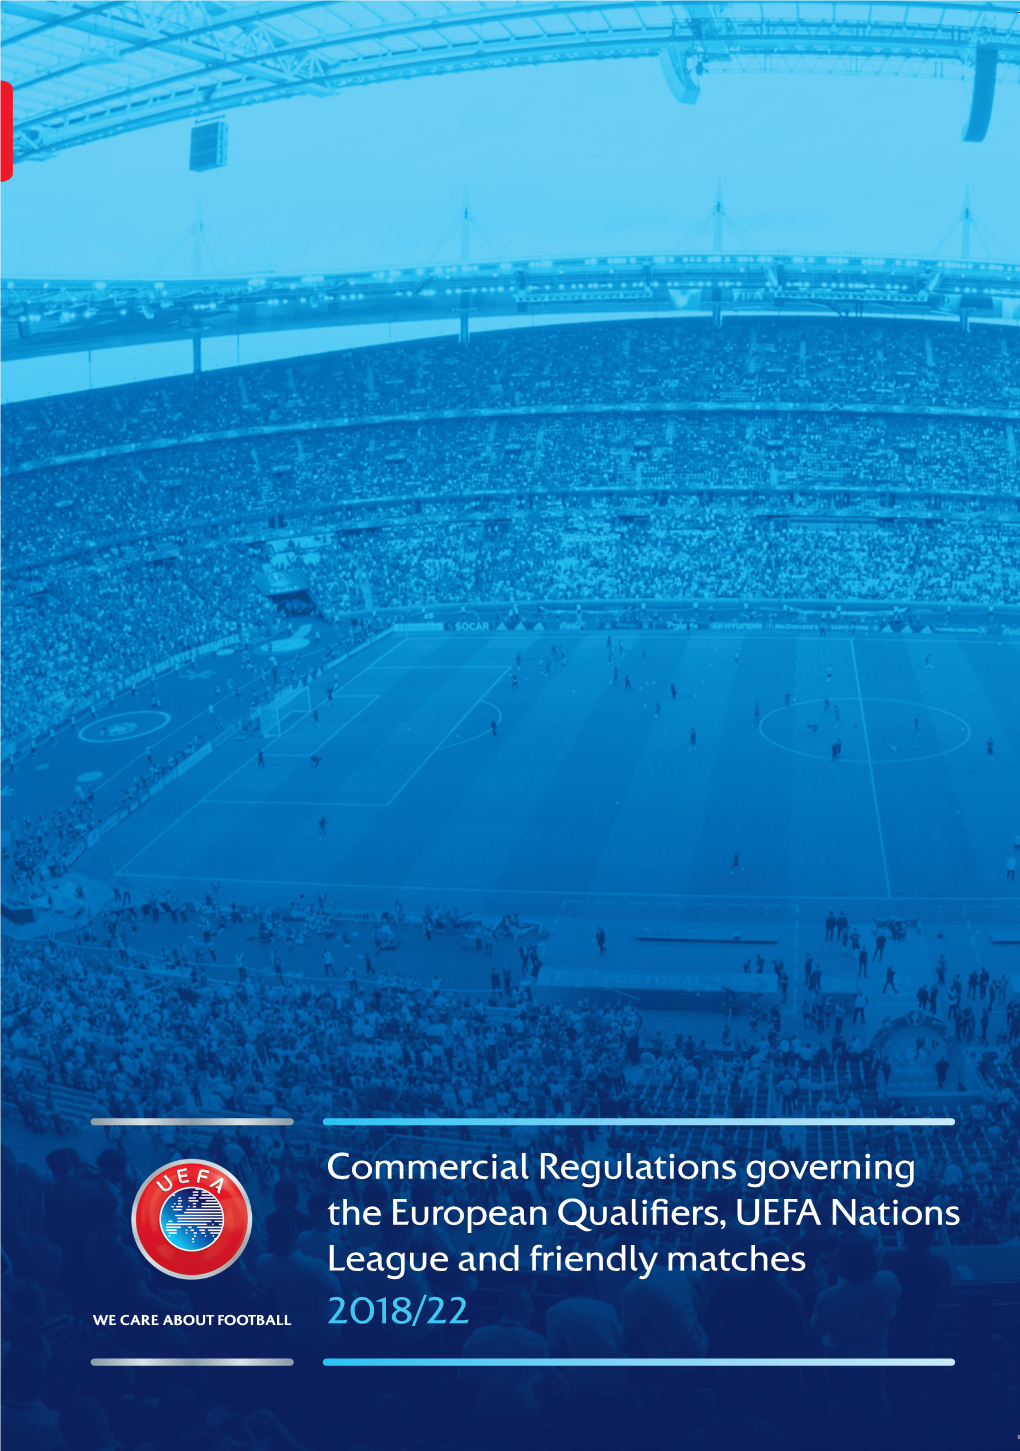 Commercial Regulations Governing the European Qualifiers, UEFA Nations League and Friendly Matches 2018/22